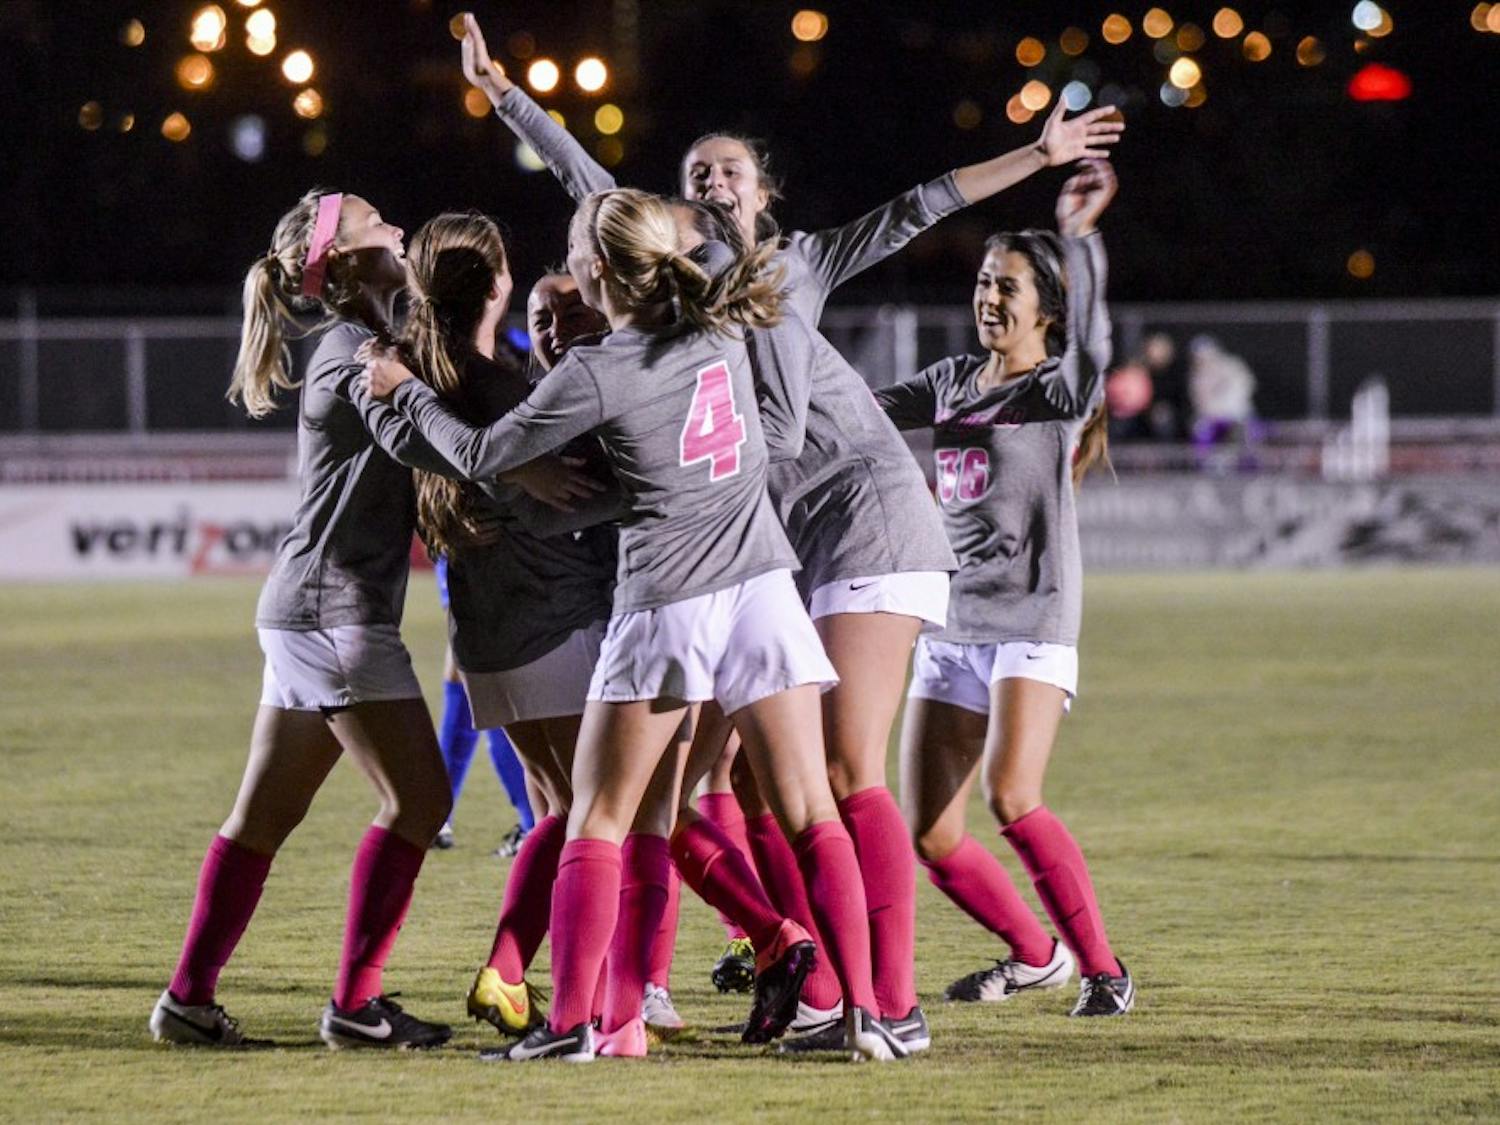 The women’s soccer team form together to celebrate their victory against San Jose State late in the fall 2015 season. The Lobos will play California University this Friday in Berkeley, California.